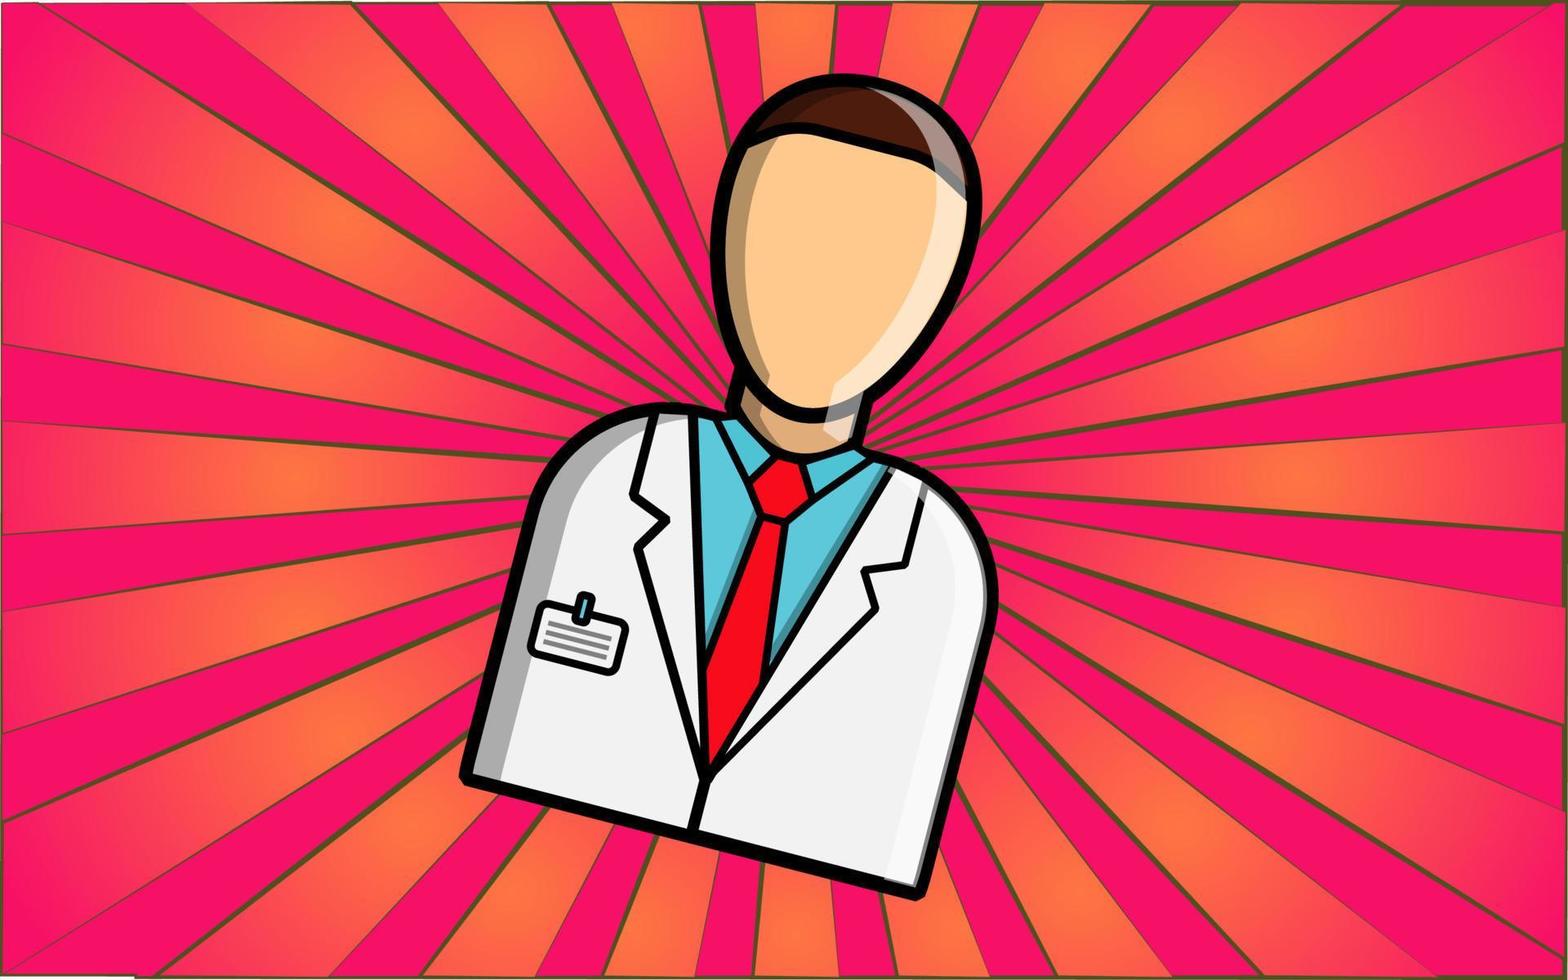 Medical employee health worker doctor man in white coat on abstract red rays background. Vector illustration